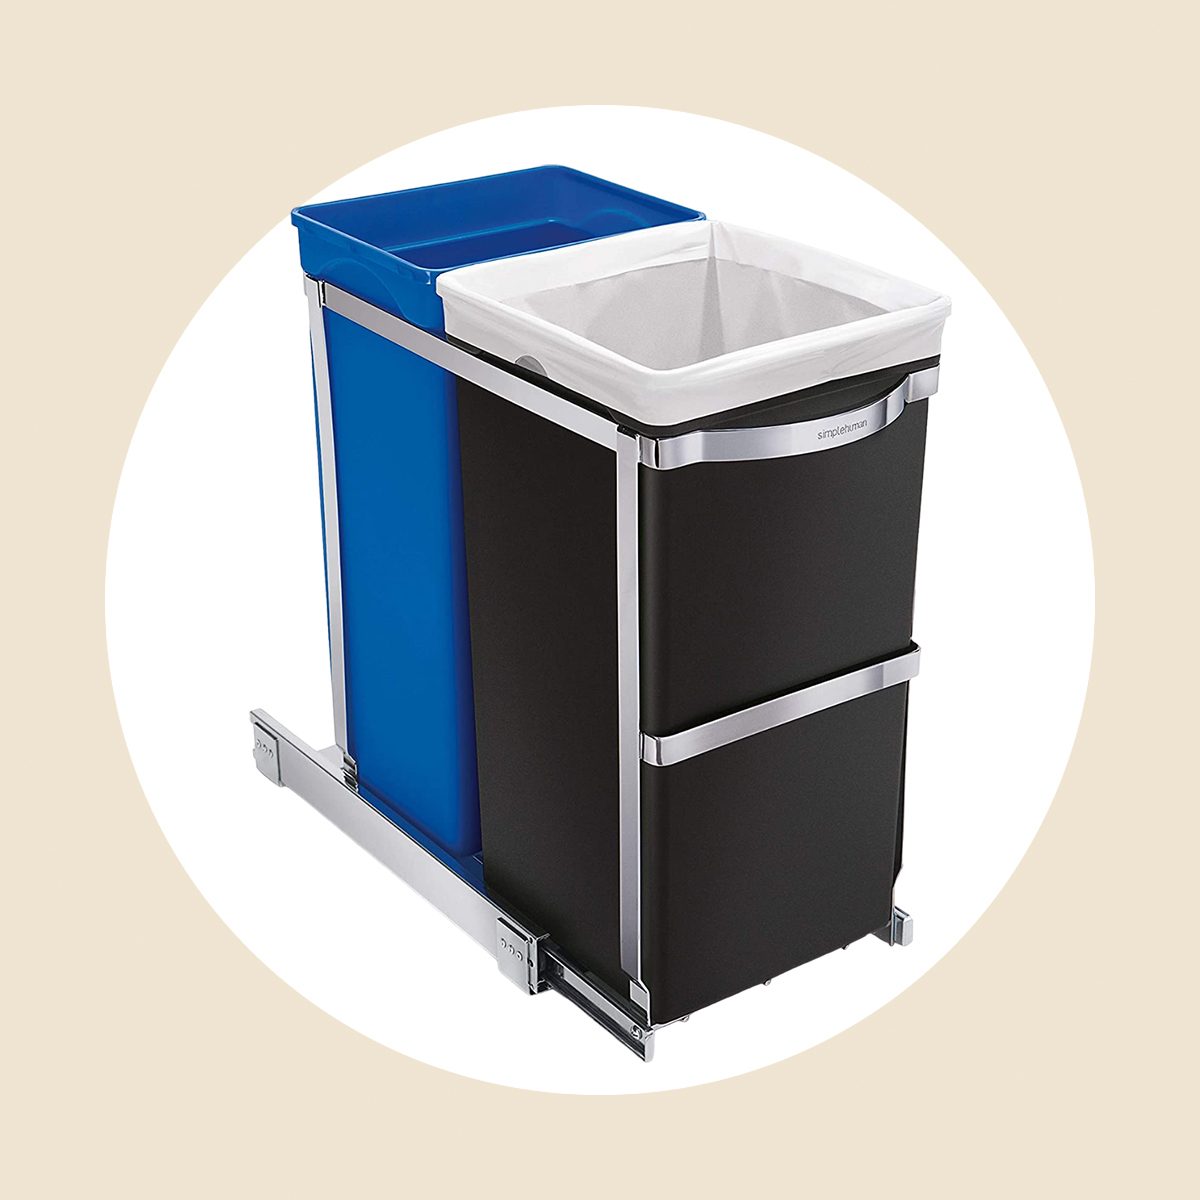 https://www.tasteofhome.com/wp-content/uploads/2022/06/Simplehuman-Pull-Out-Recycling-Bin-and-Trash-Can_ecomm_via-amazon.com_.jpg?fit=700%2C700